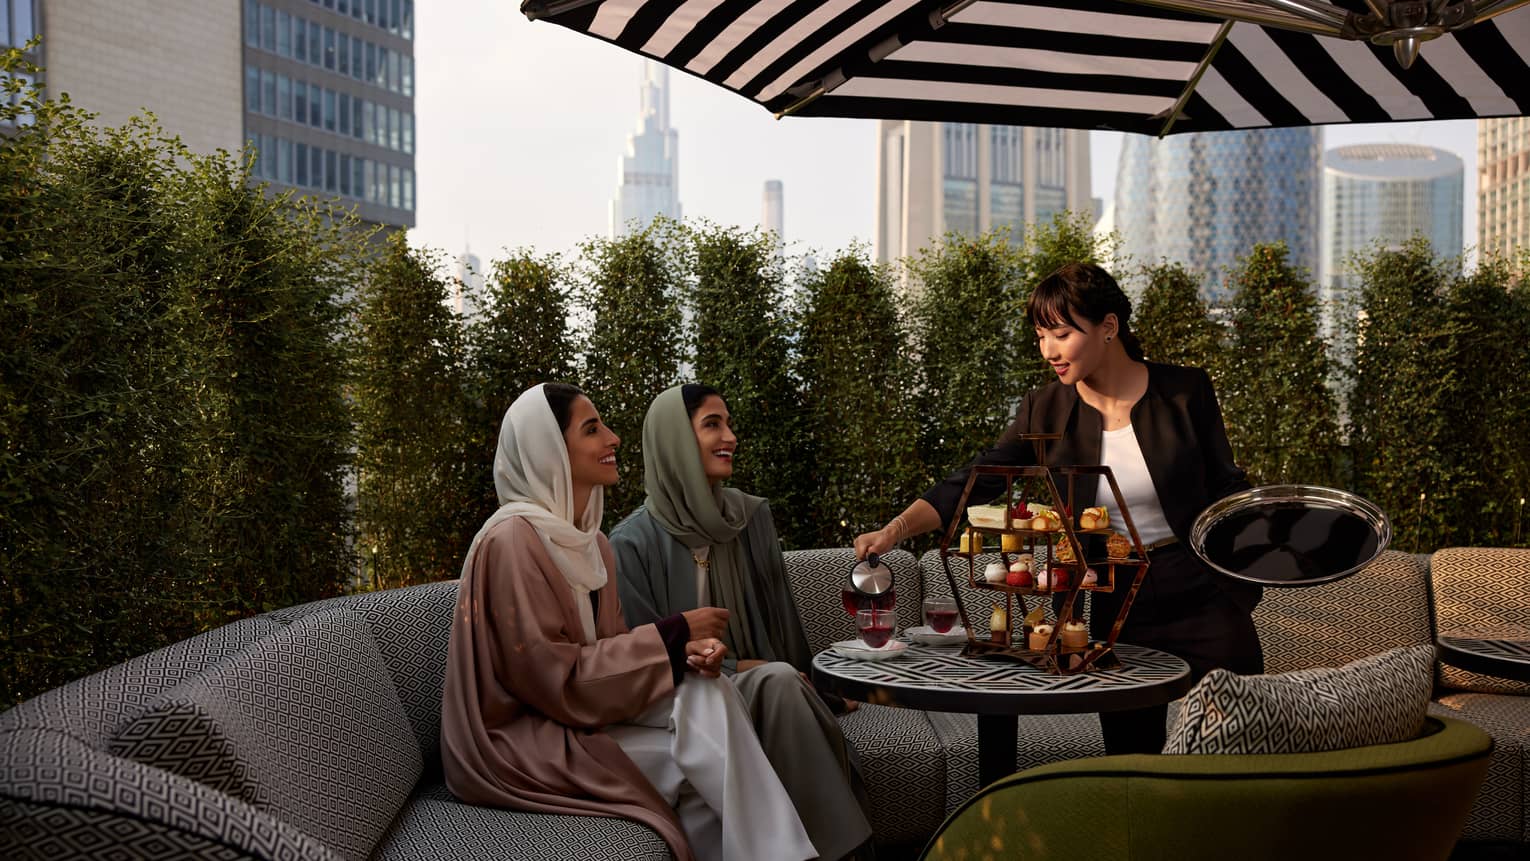 Two women sit on a beige patterned sofa beneath a black-and-white patio umbrella as a waitress serves them tea and pastries